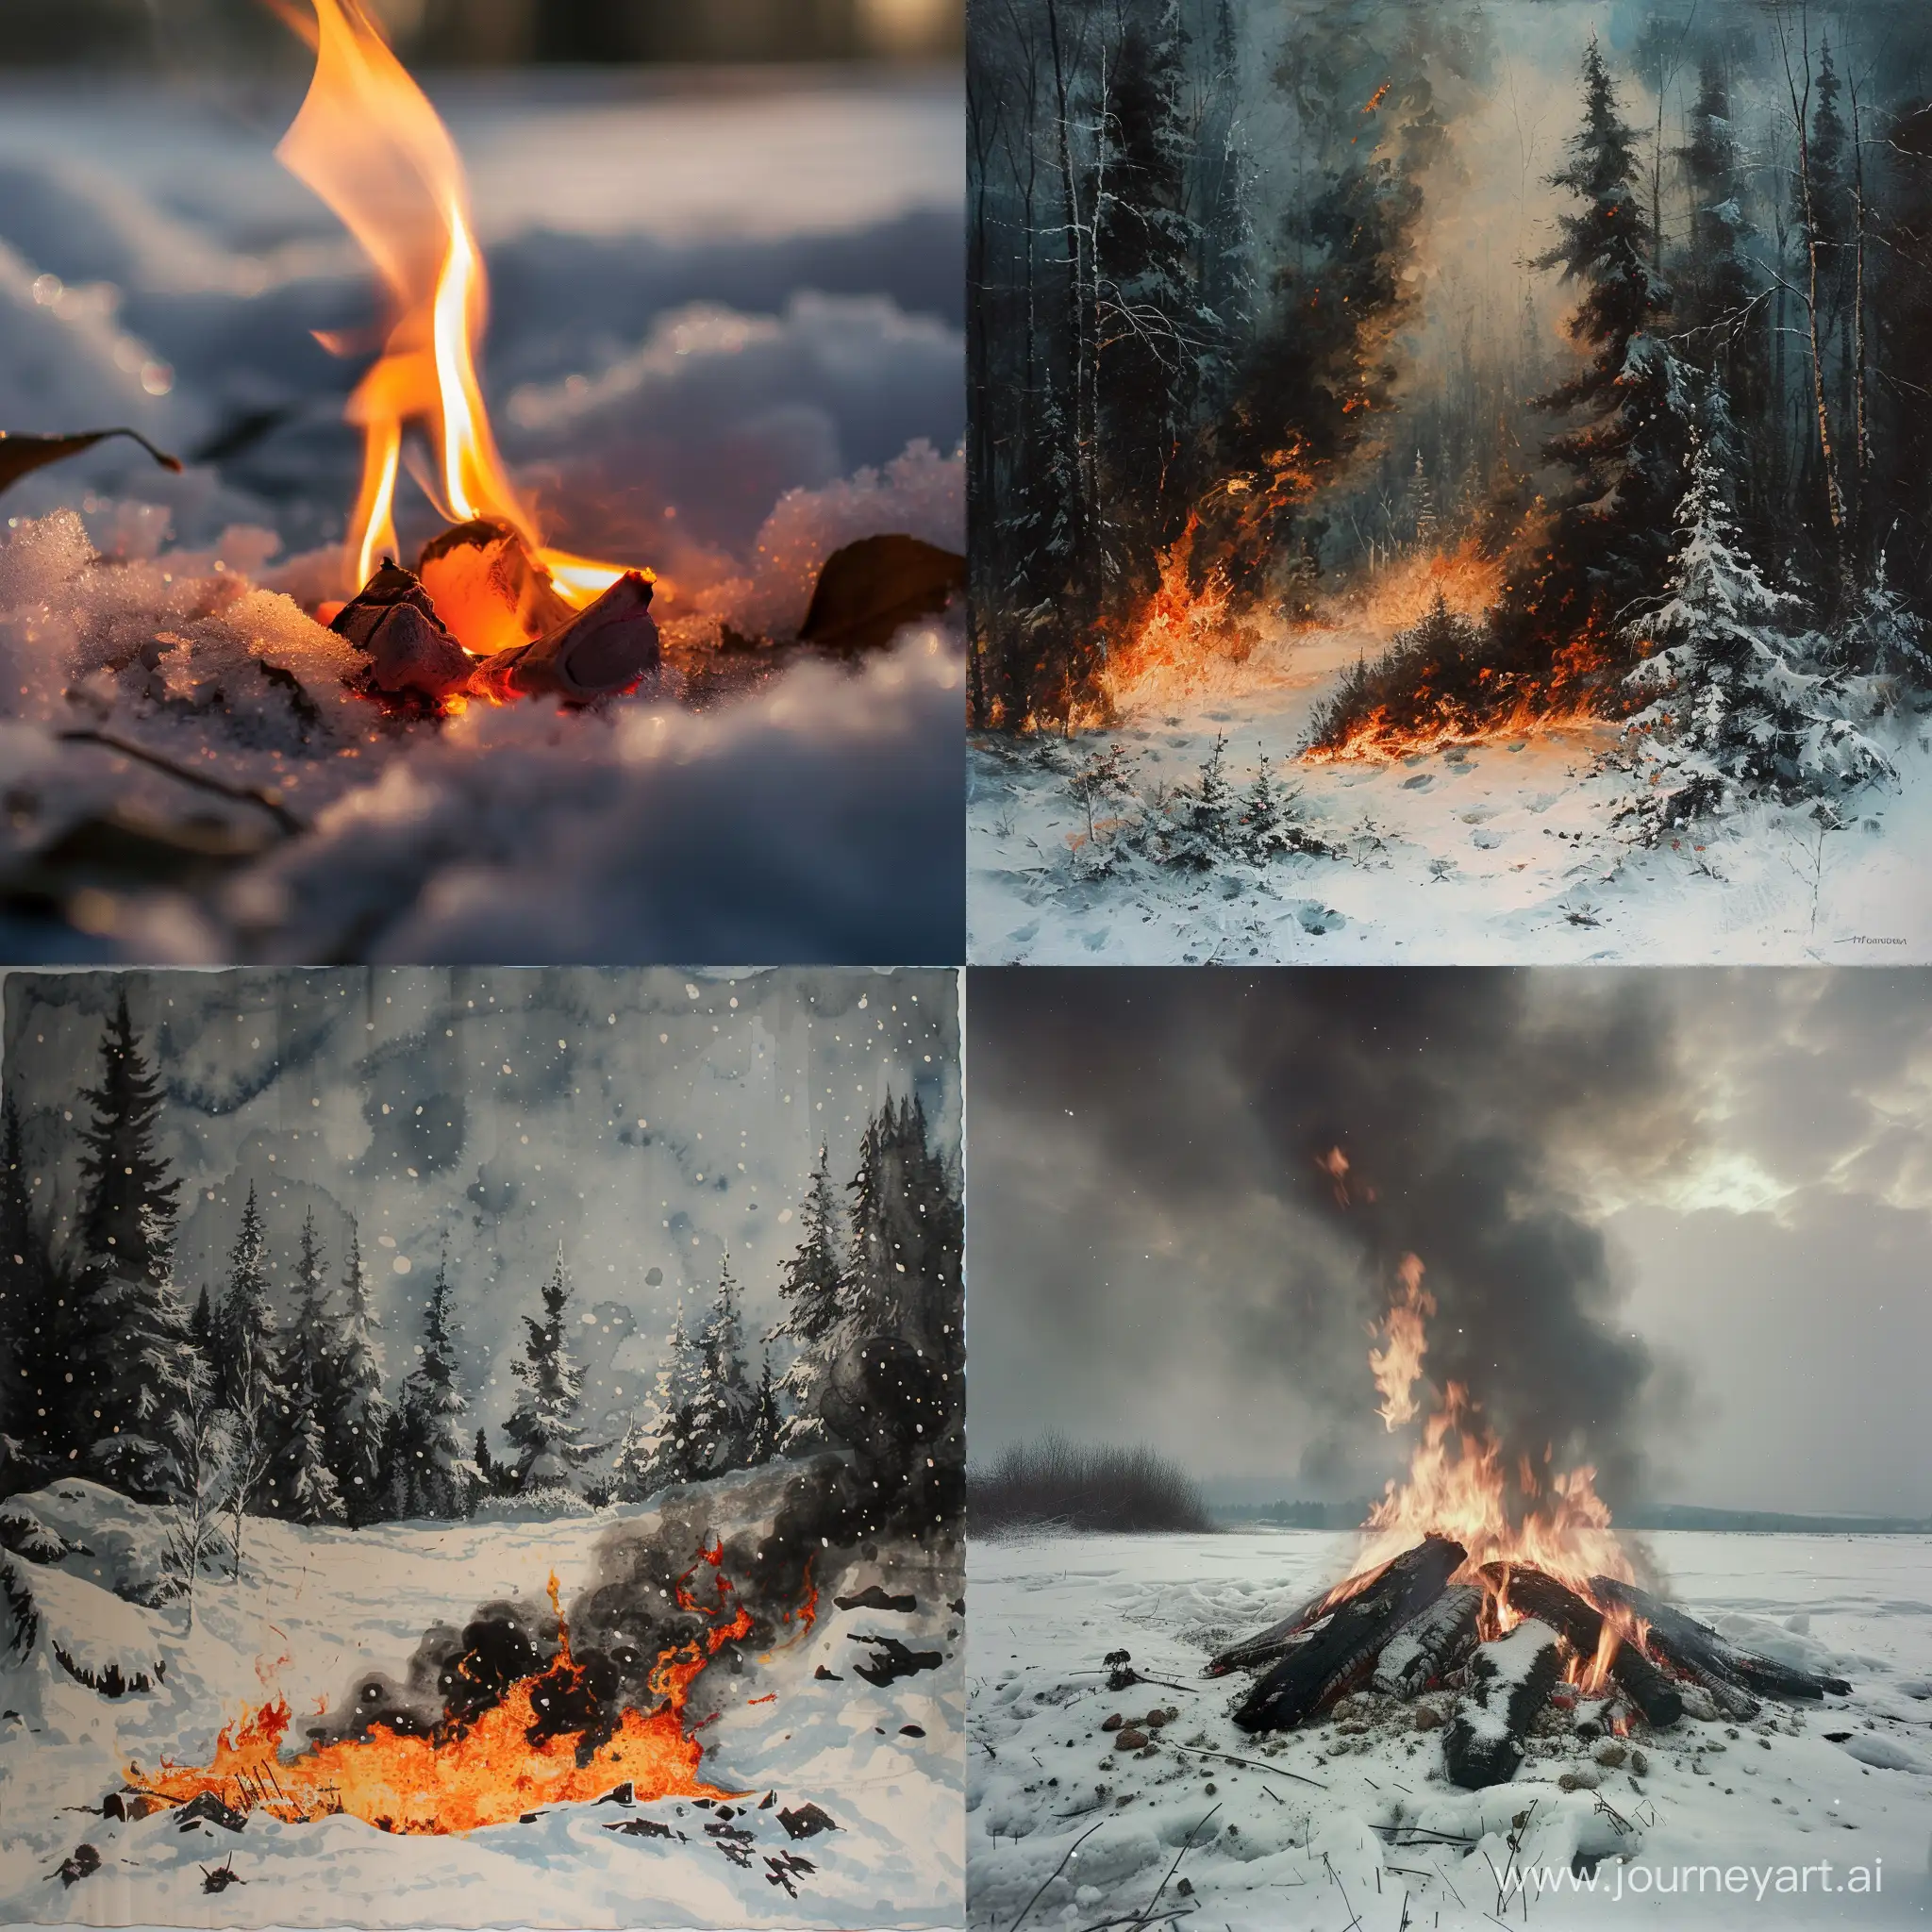 Russian-Rubles-Burning-in-Snow-Symbolic-Financial-Loss